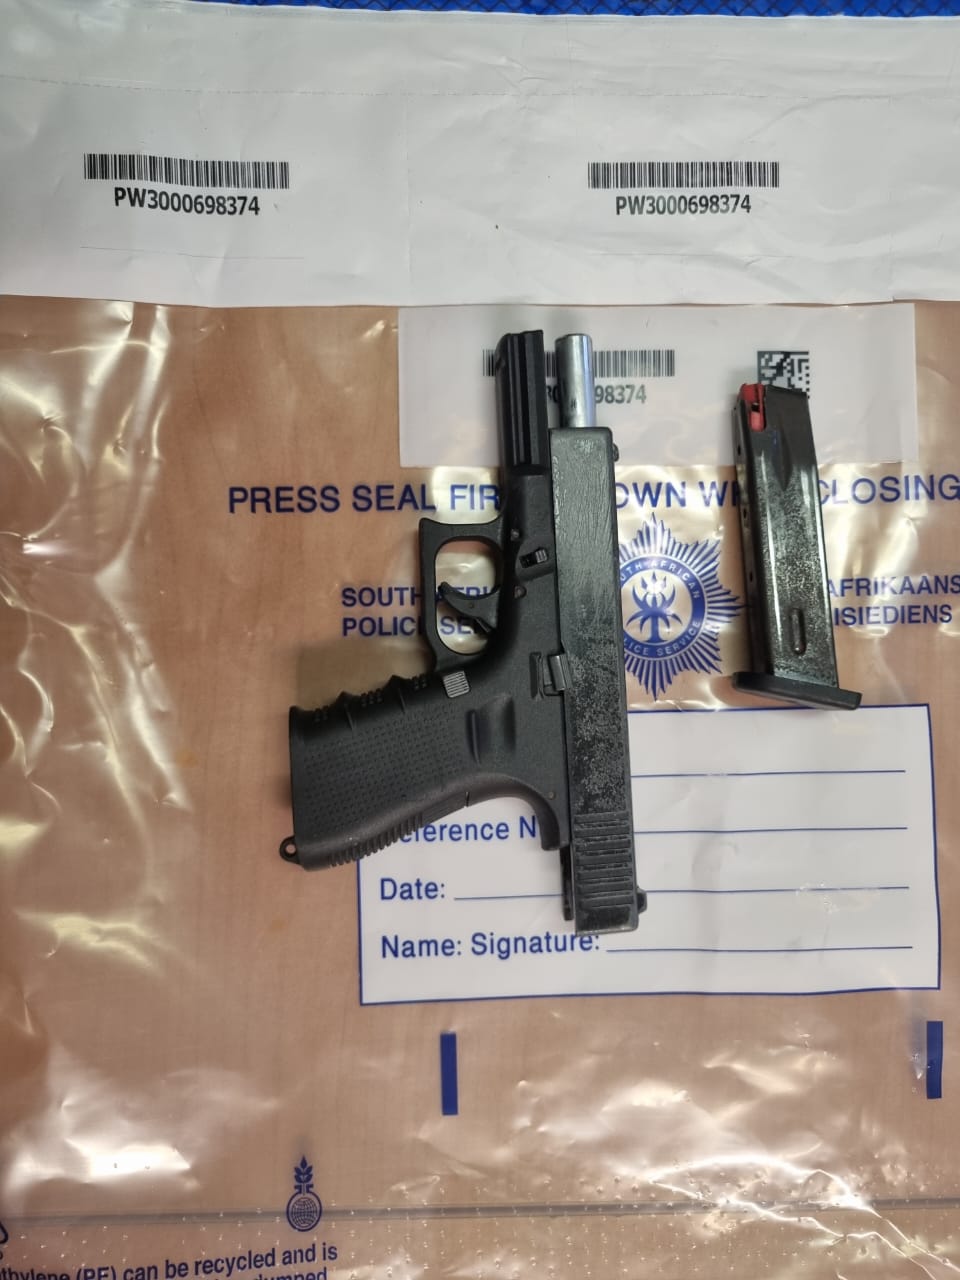 Suspects due to appear in court for firearms and ammunition charges